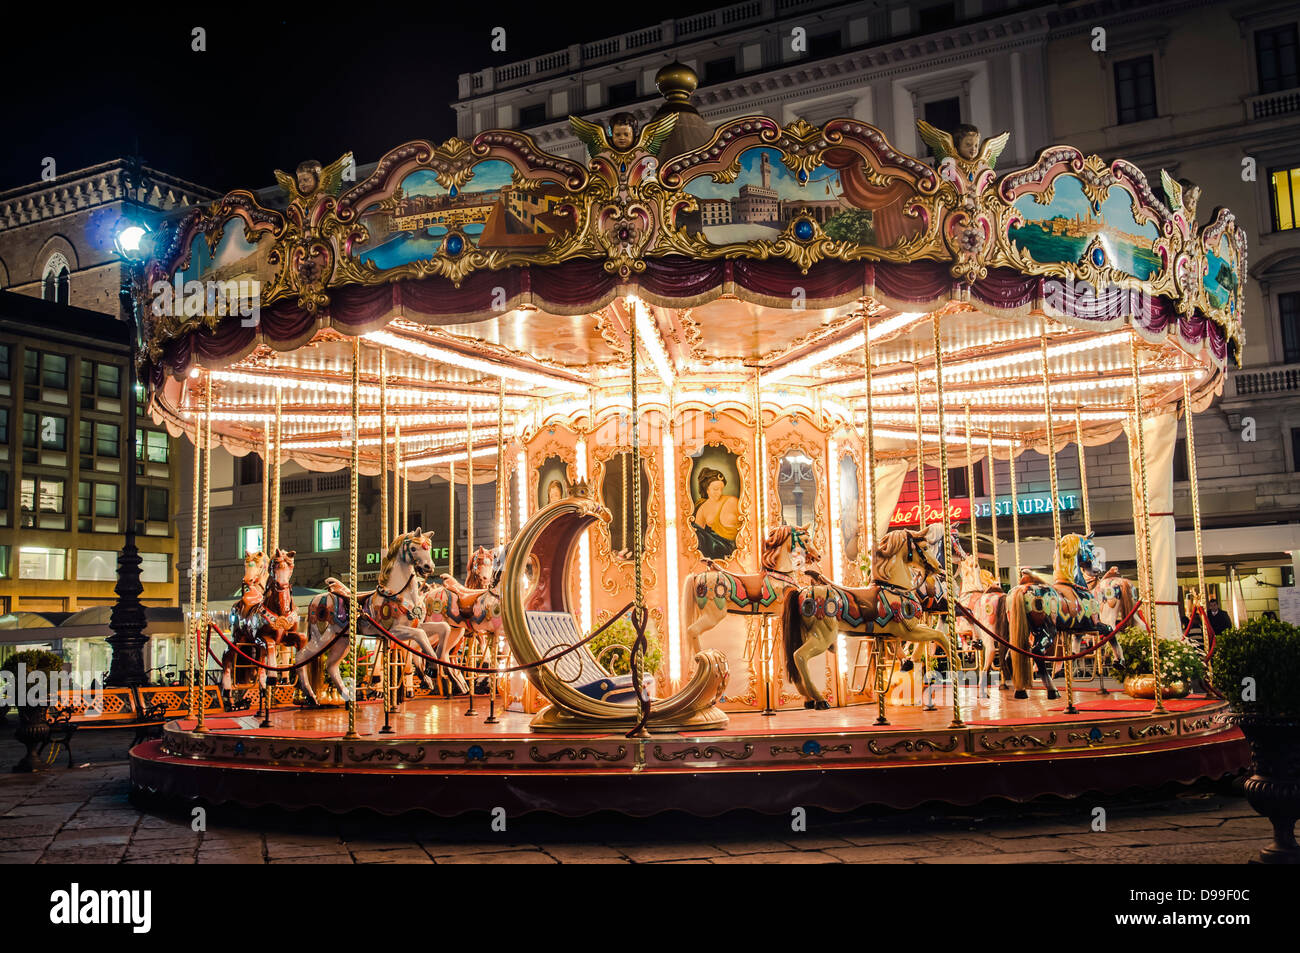 Carousel at night in Florence, Italy Stock Photo